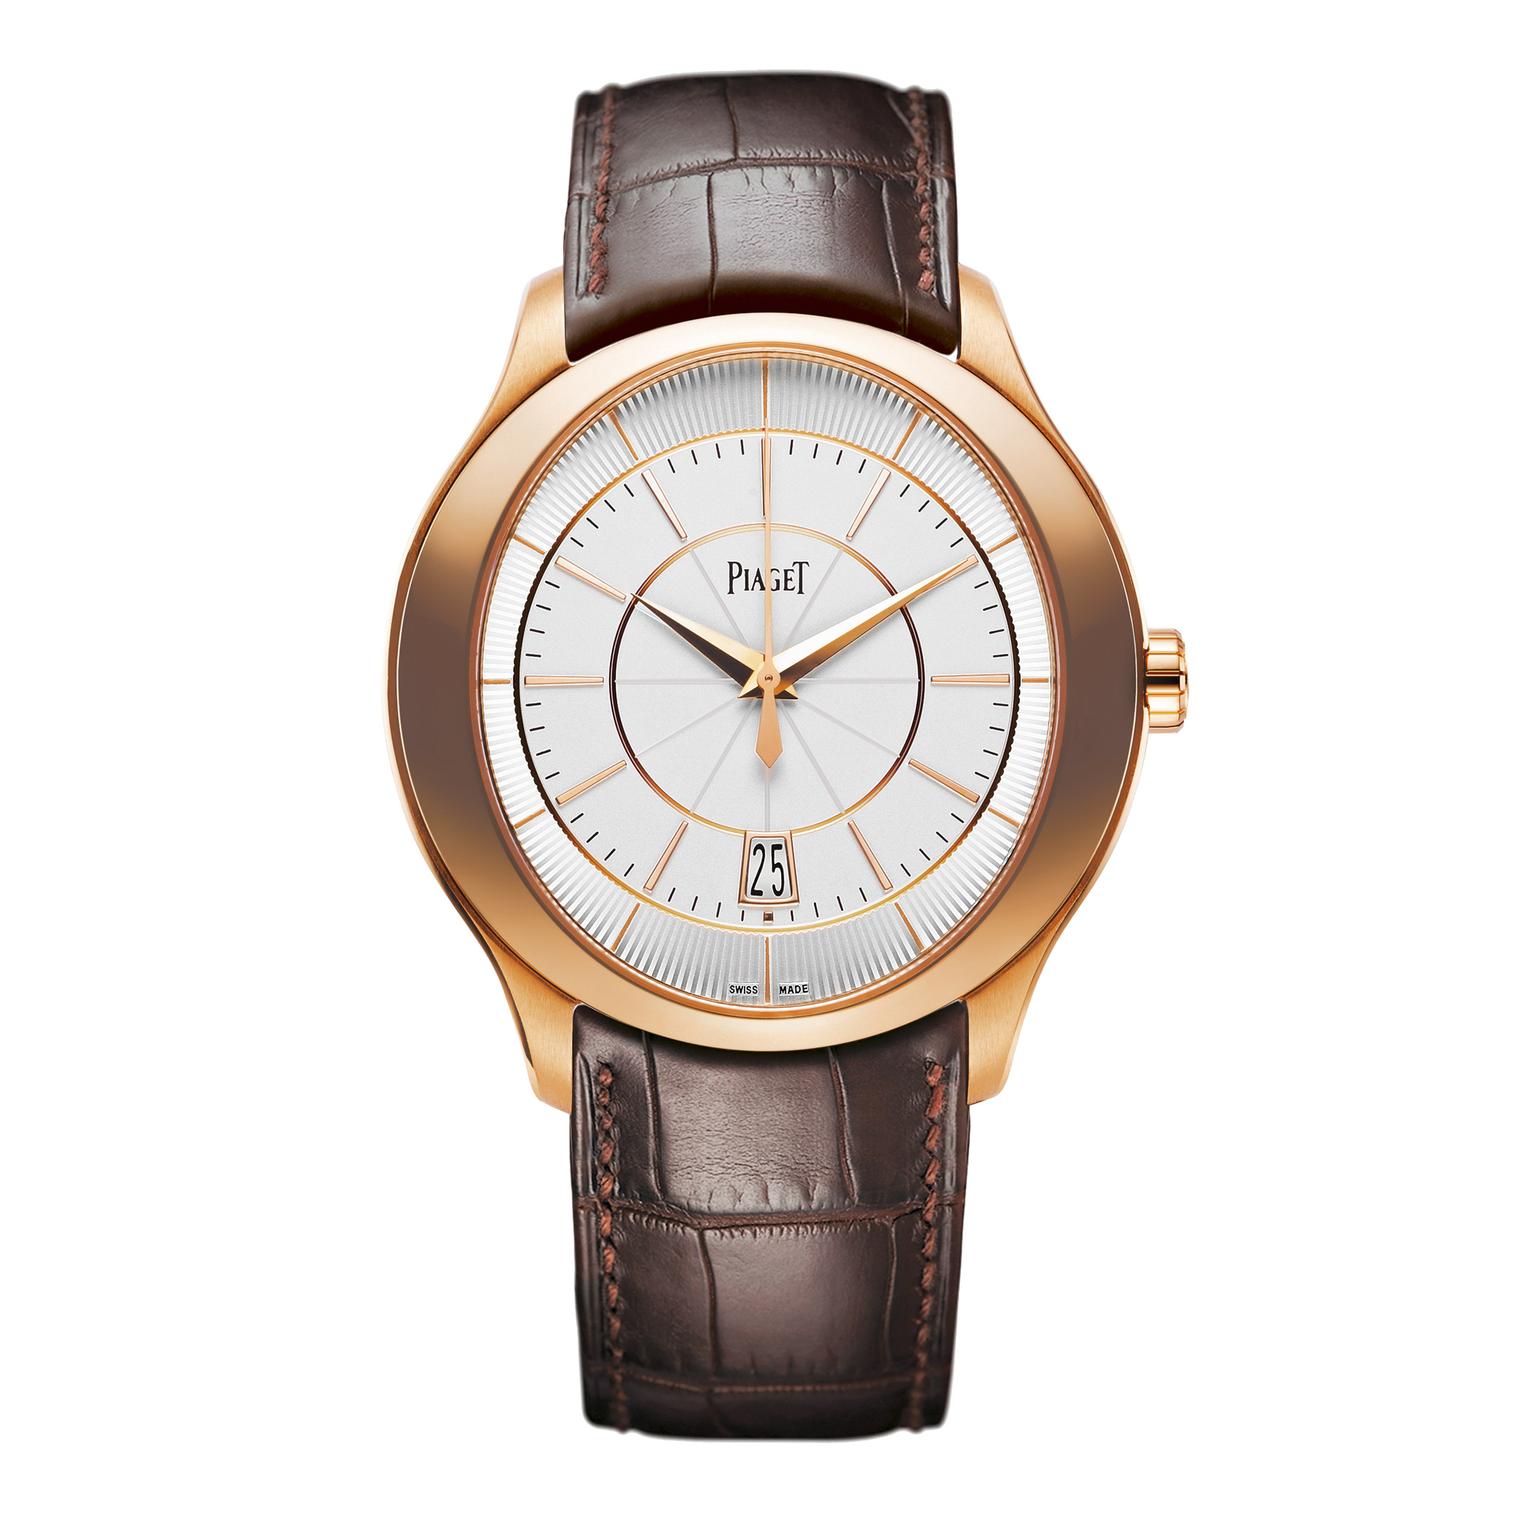 Piaget-Governeur-Watch-Zoom